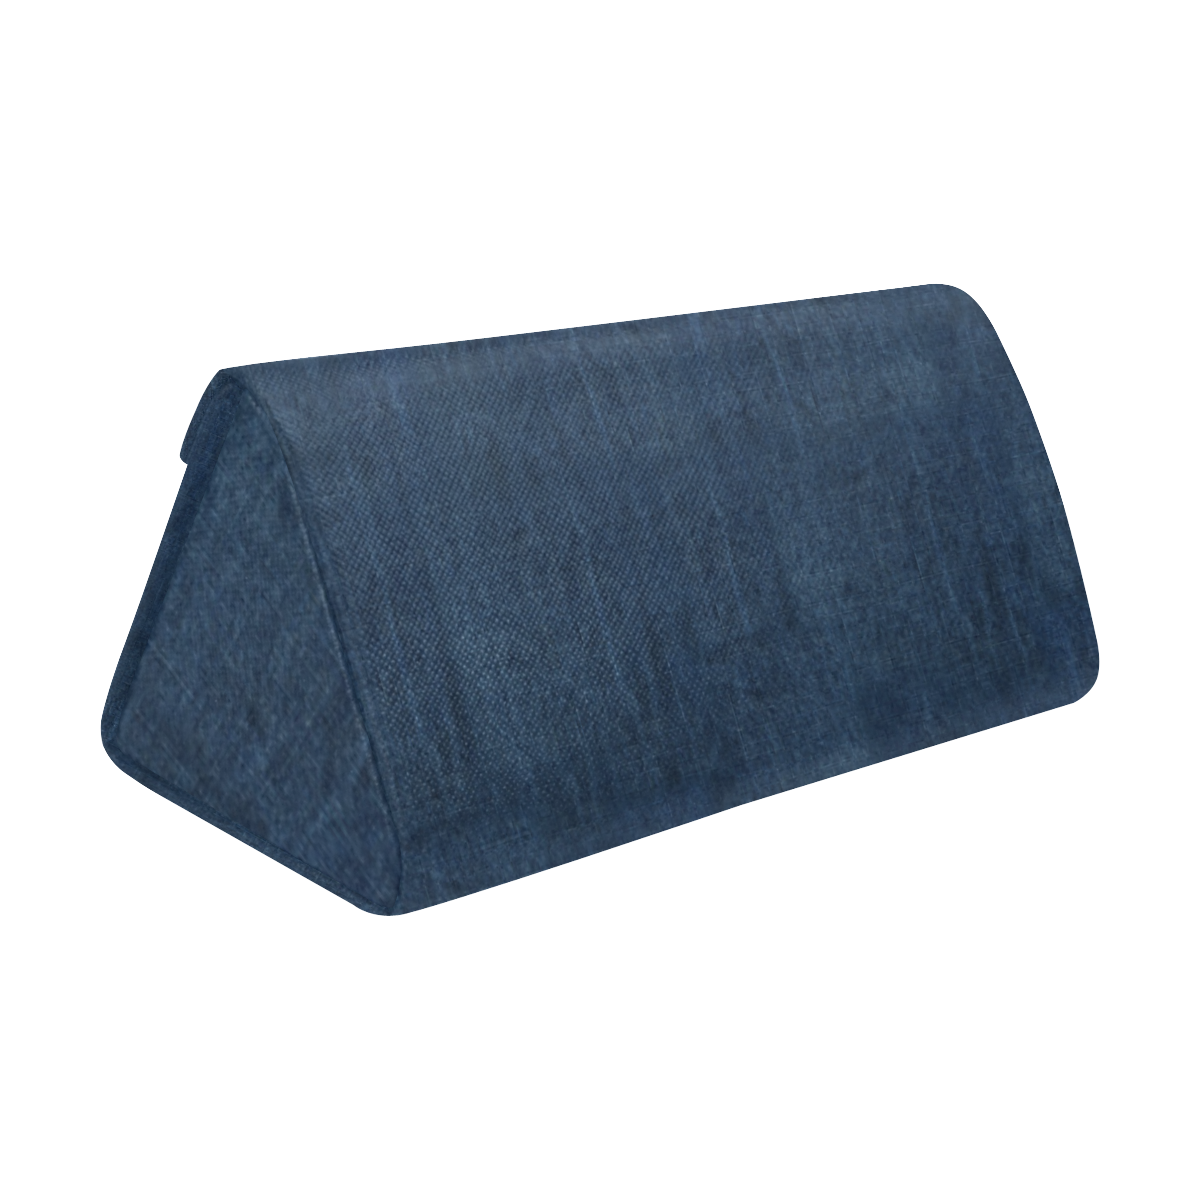 Fire and Flames With Denim Custom Foldable Glasses Case